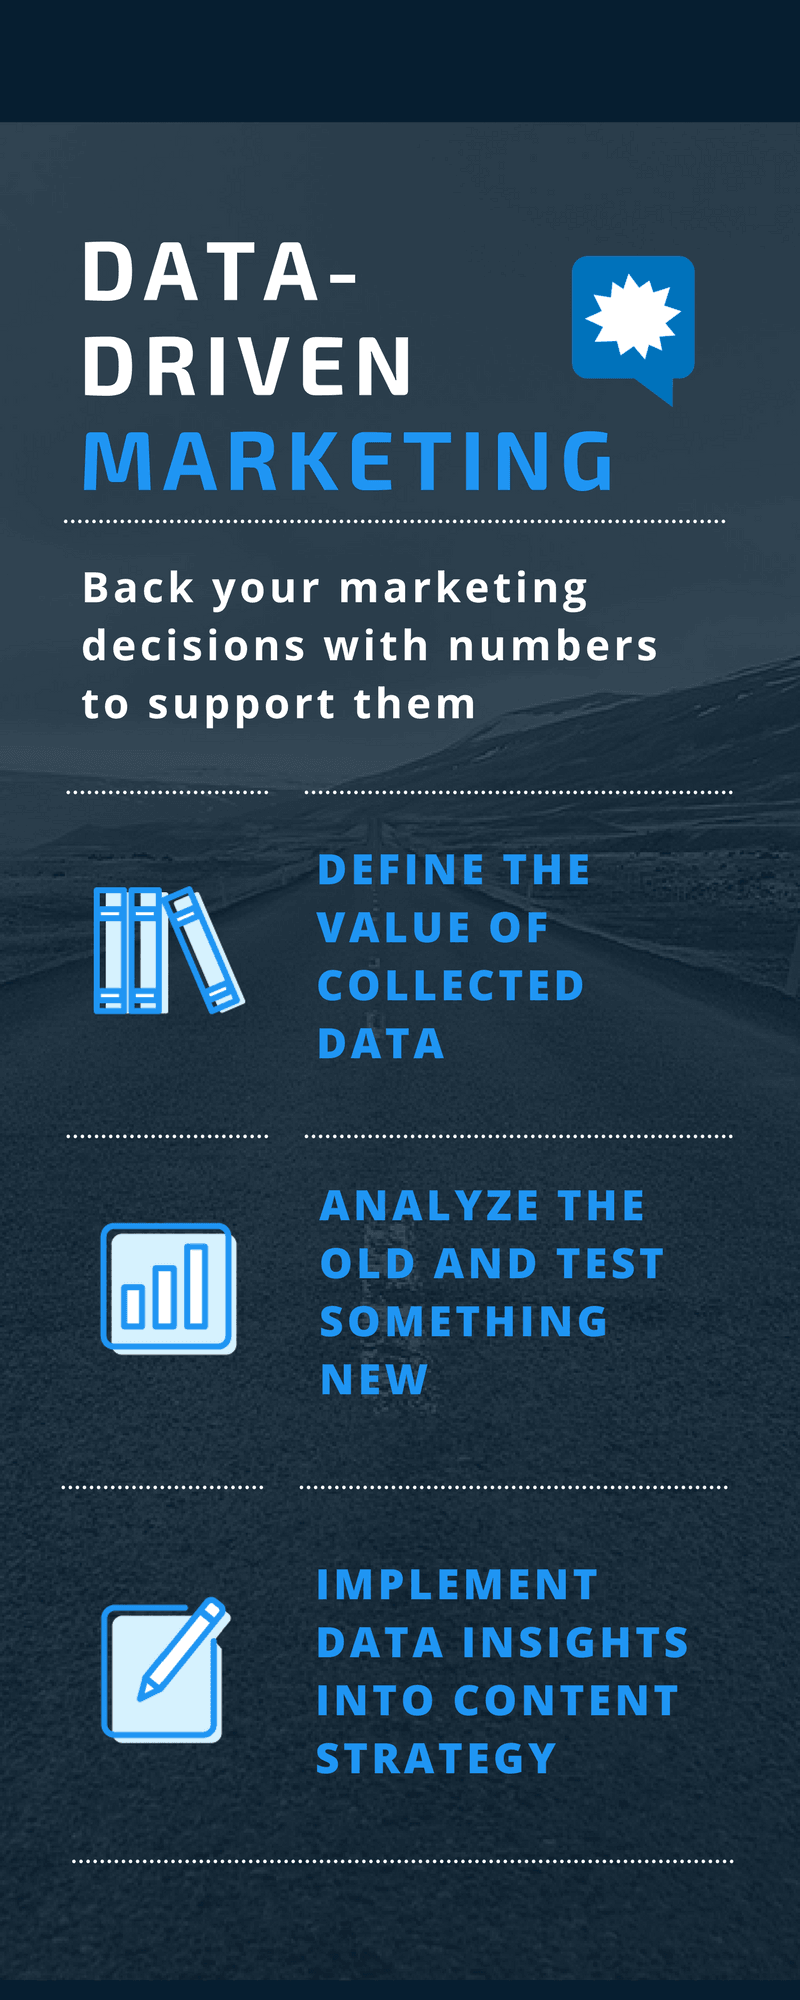 Data-driven marketing starts with numbers but doesn't end there.